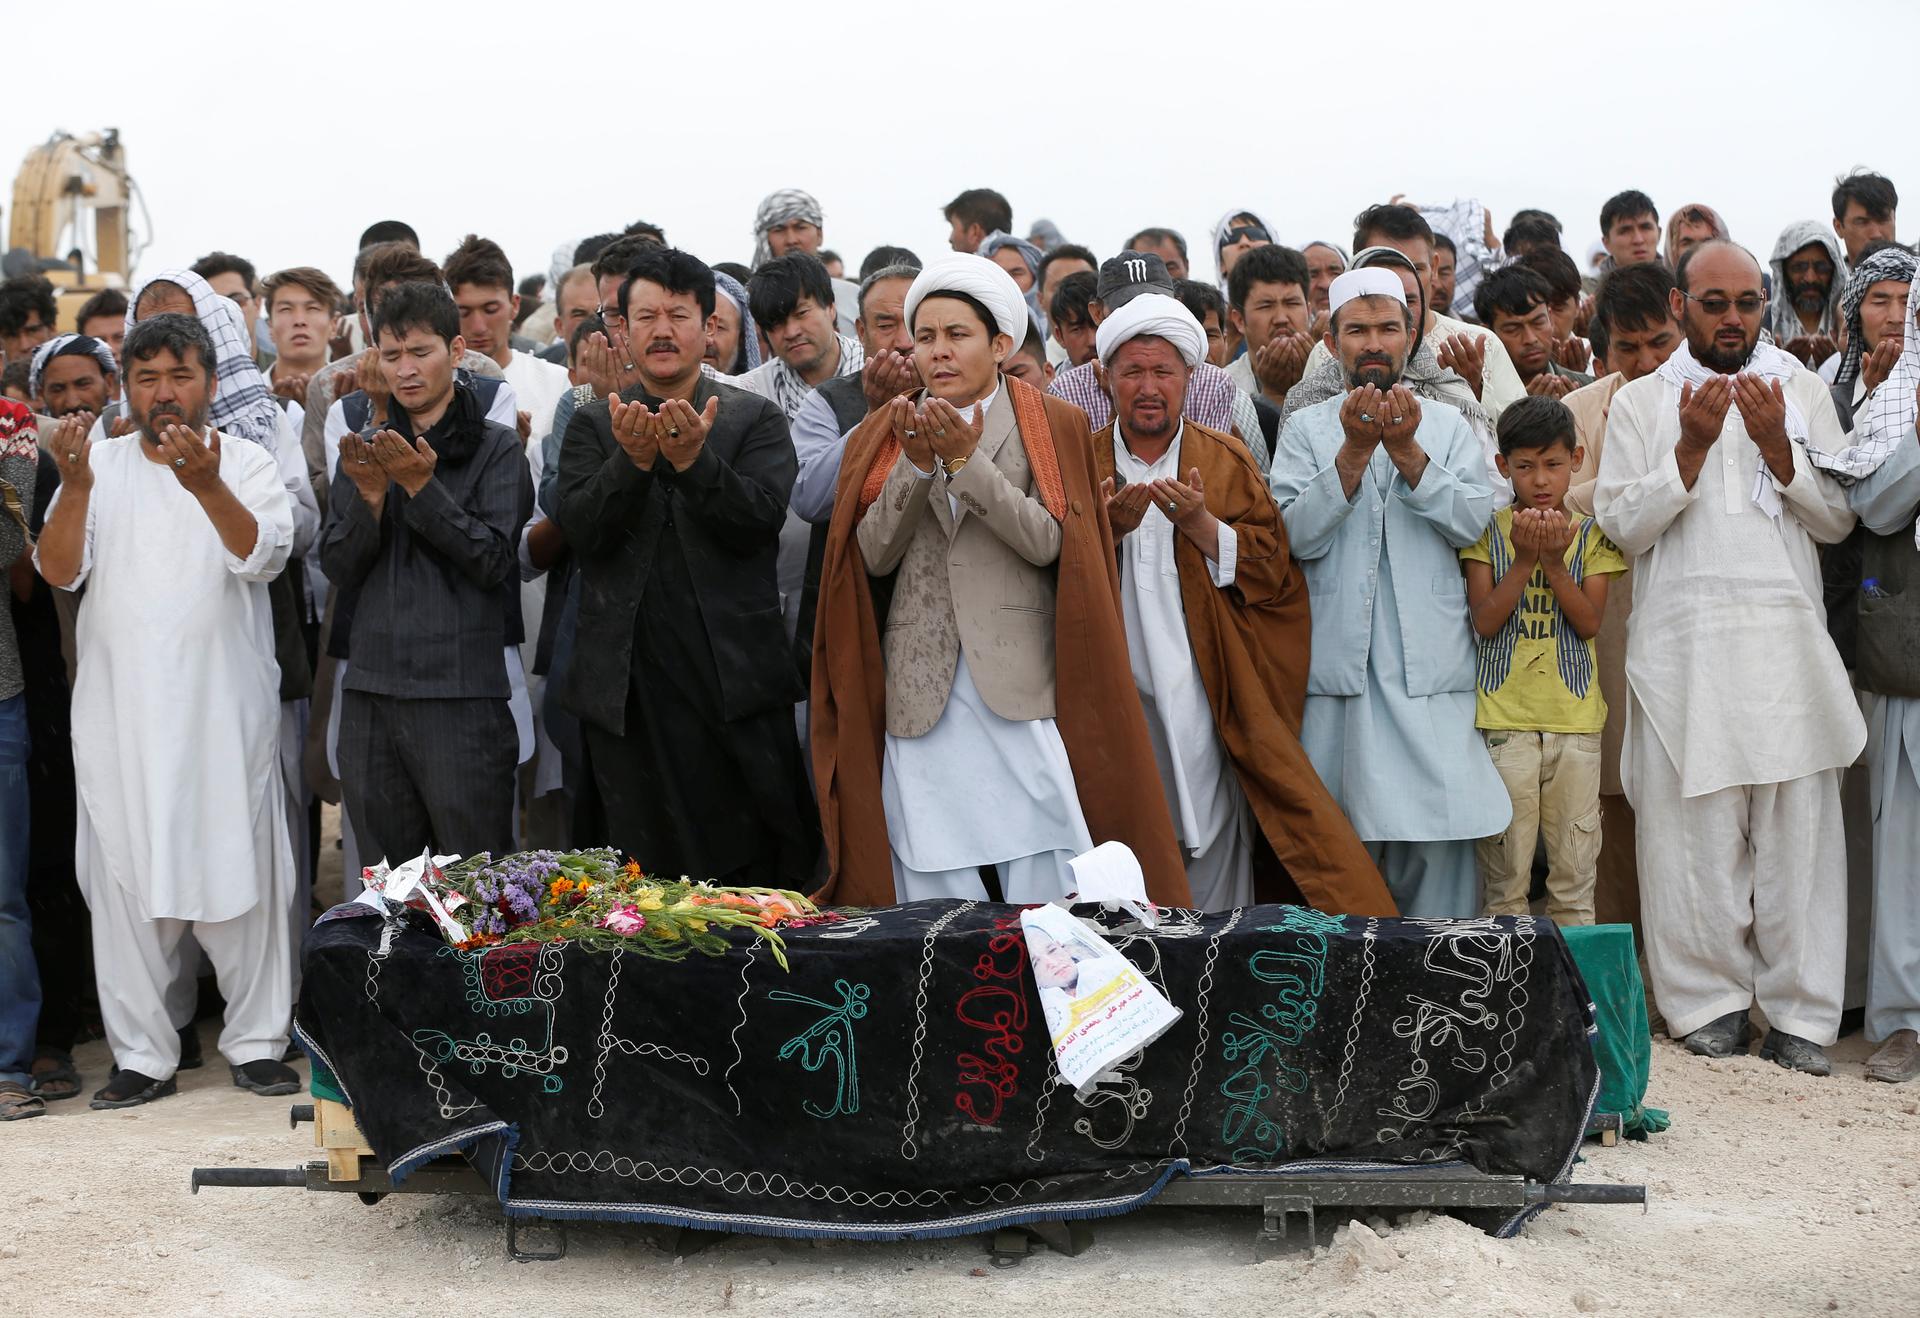 People perform prayers at the funeral for one of the victims of yesterday's suicide attack in Kabul, Afghanistan July 24, 2016.